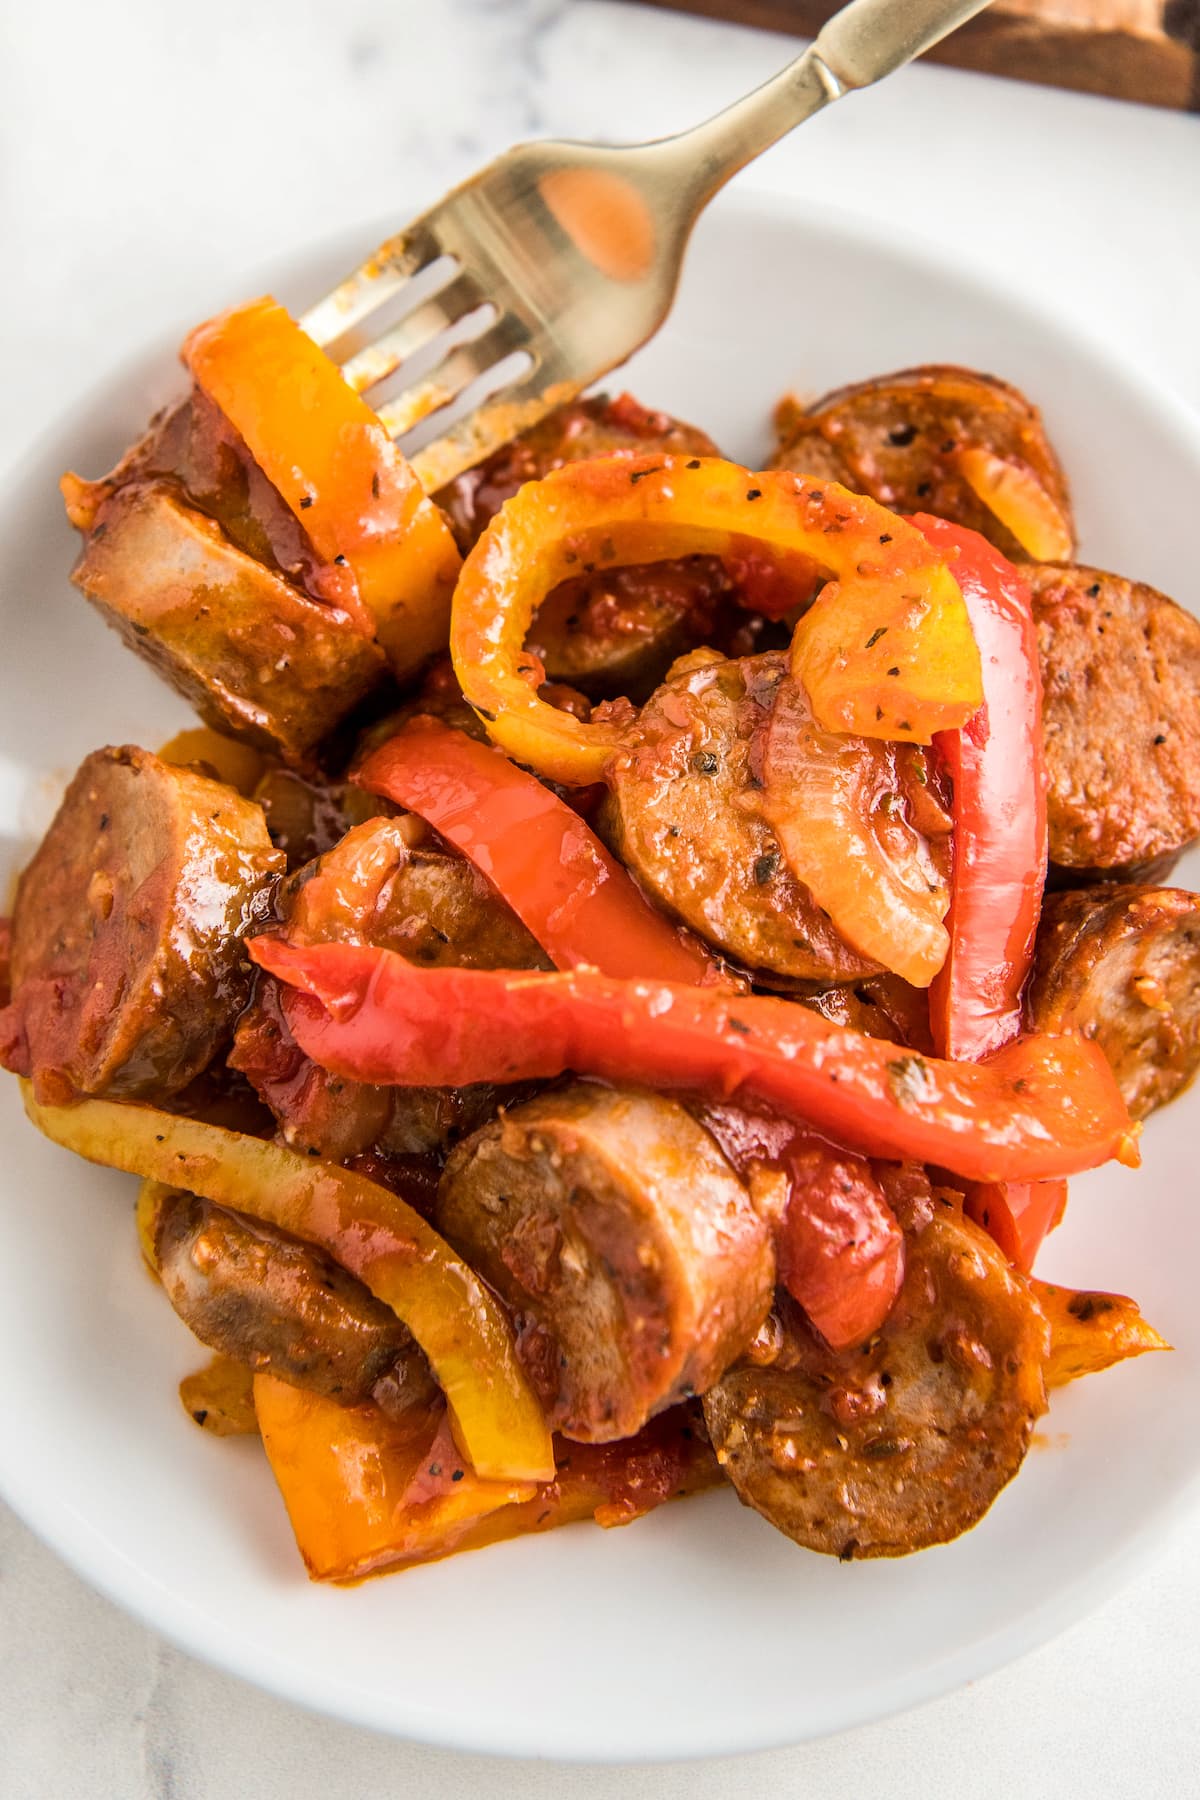 A plate with a fork filled with onions, peppers and sausage.